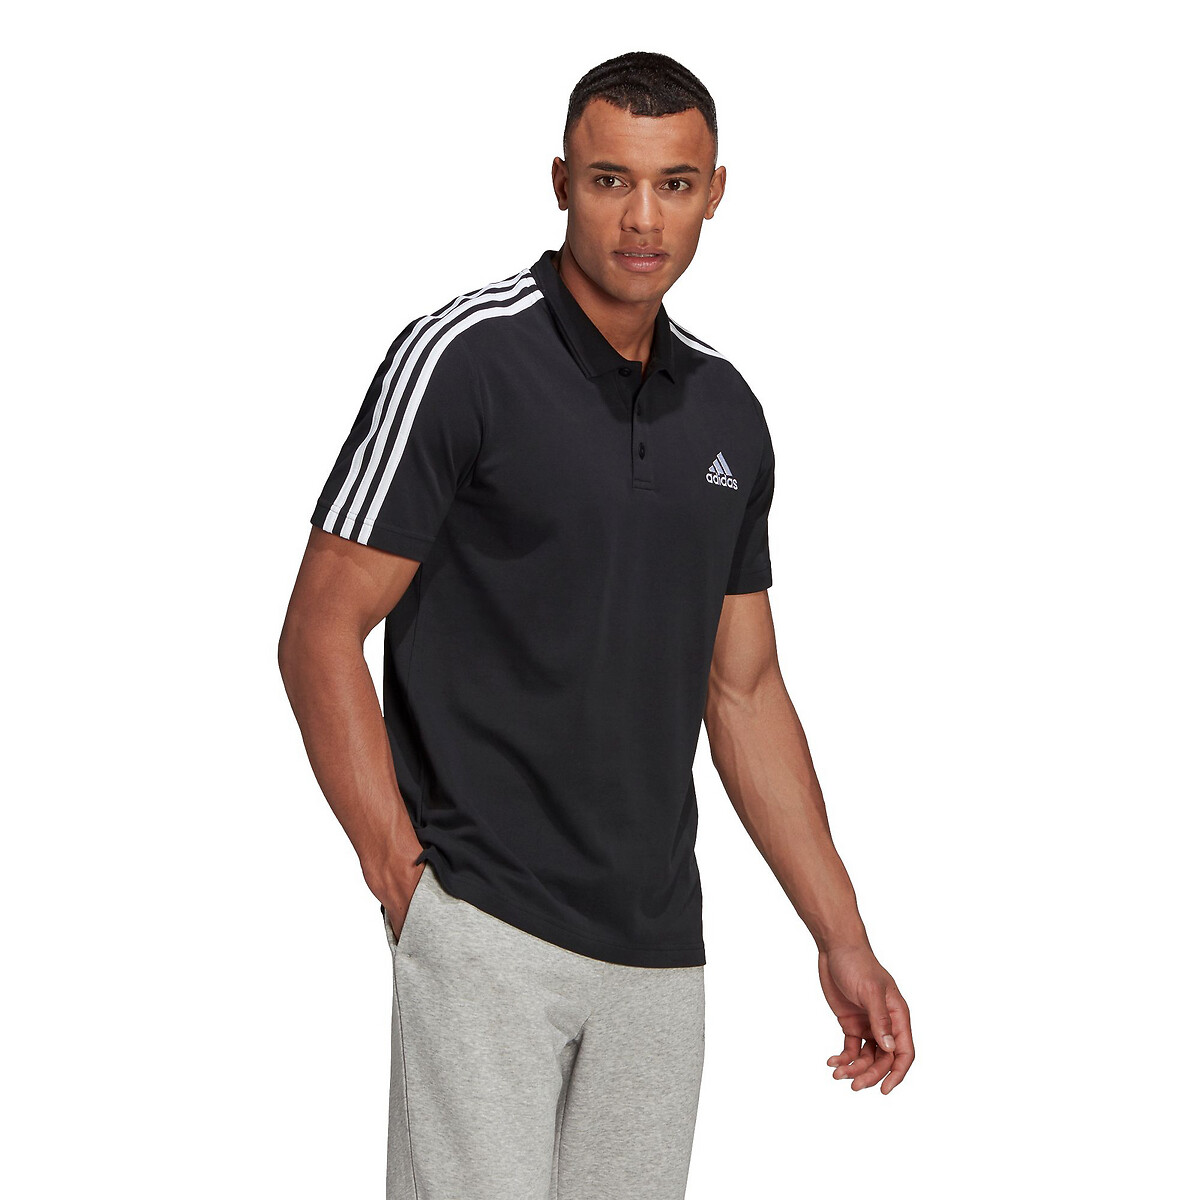 Cotton mix polo shirt with 3-stripes and short sleeves, black, Adidas ...